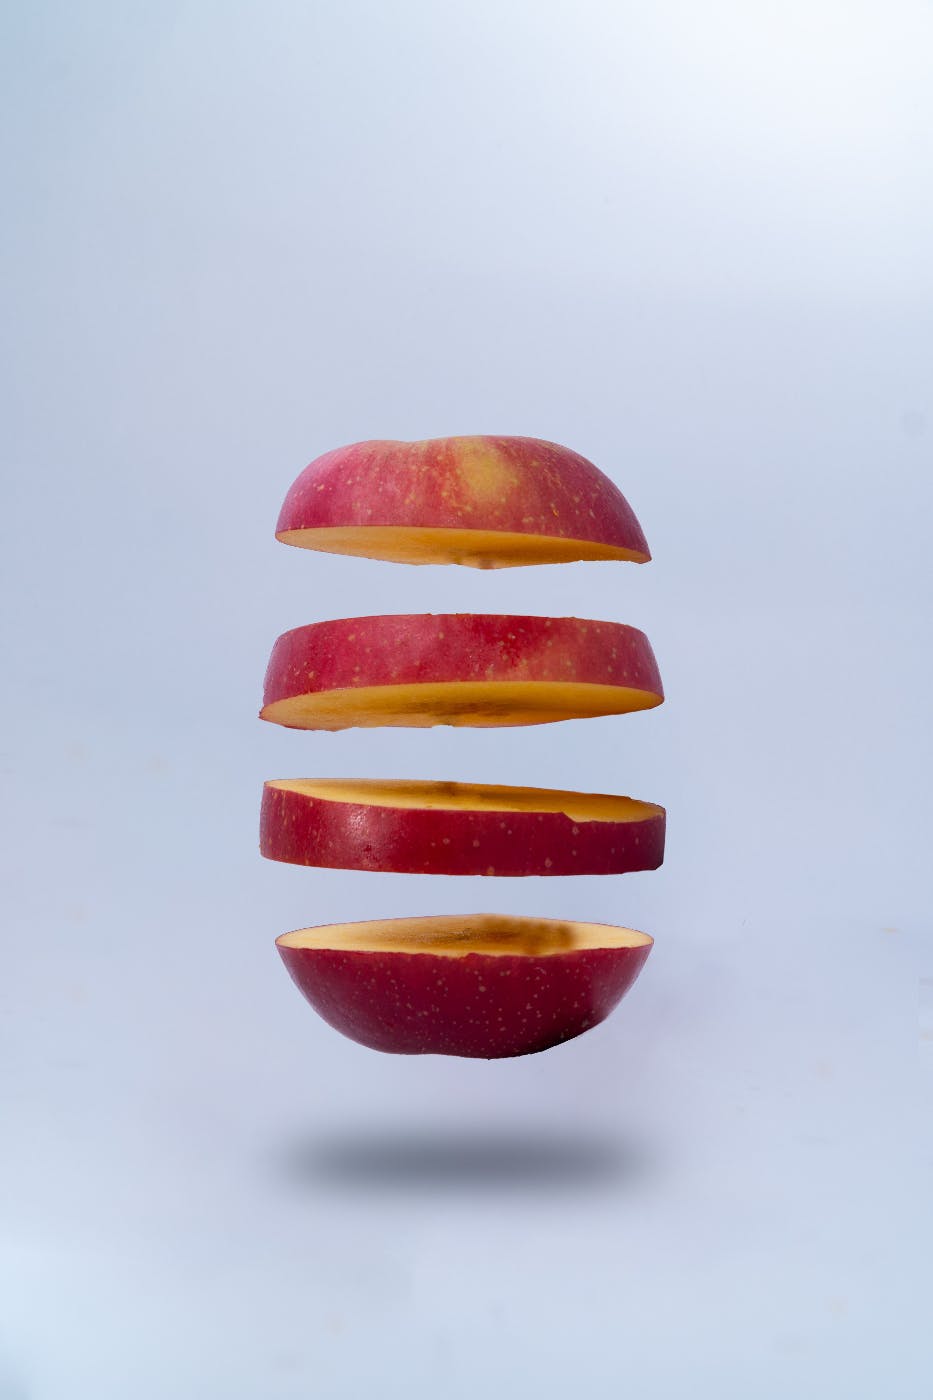 an apple cut into four slices floating in the air